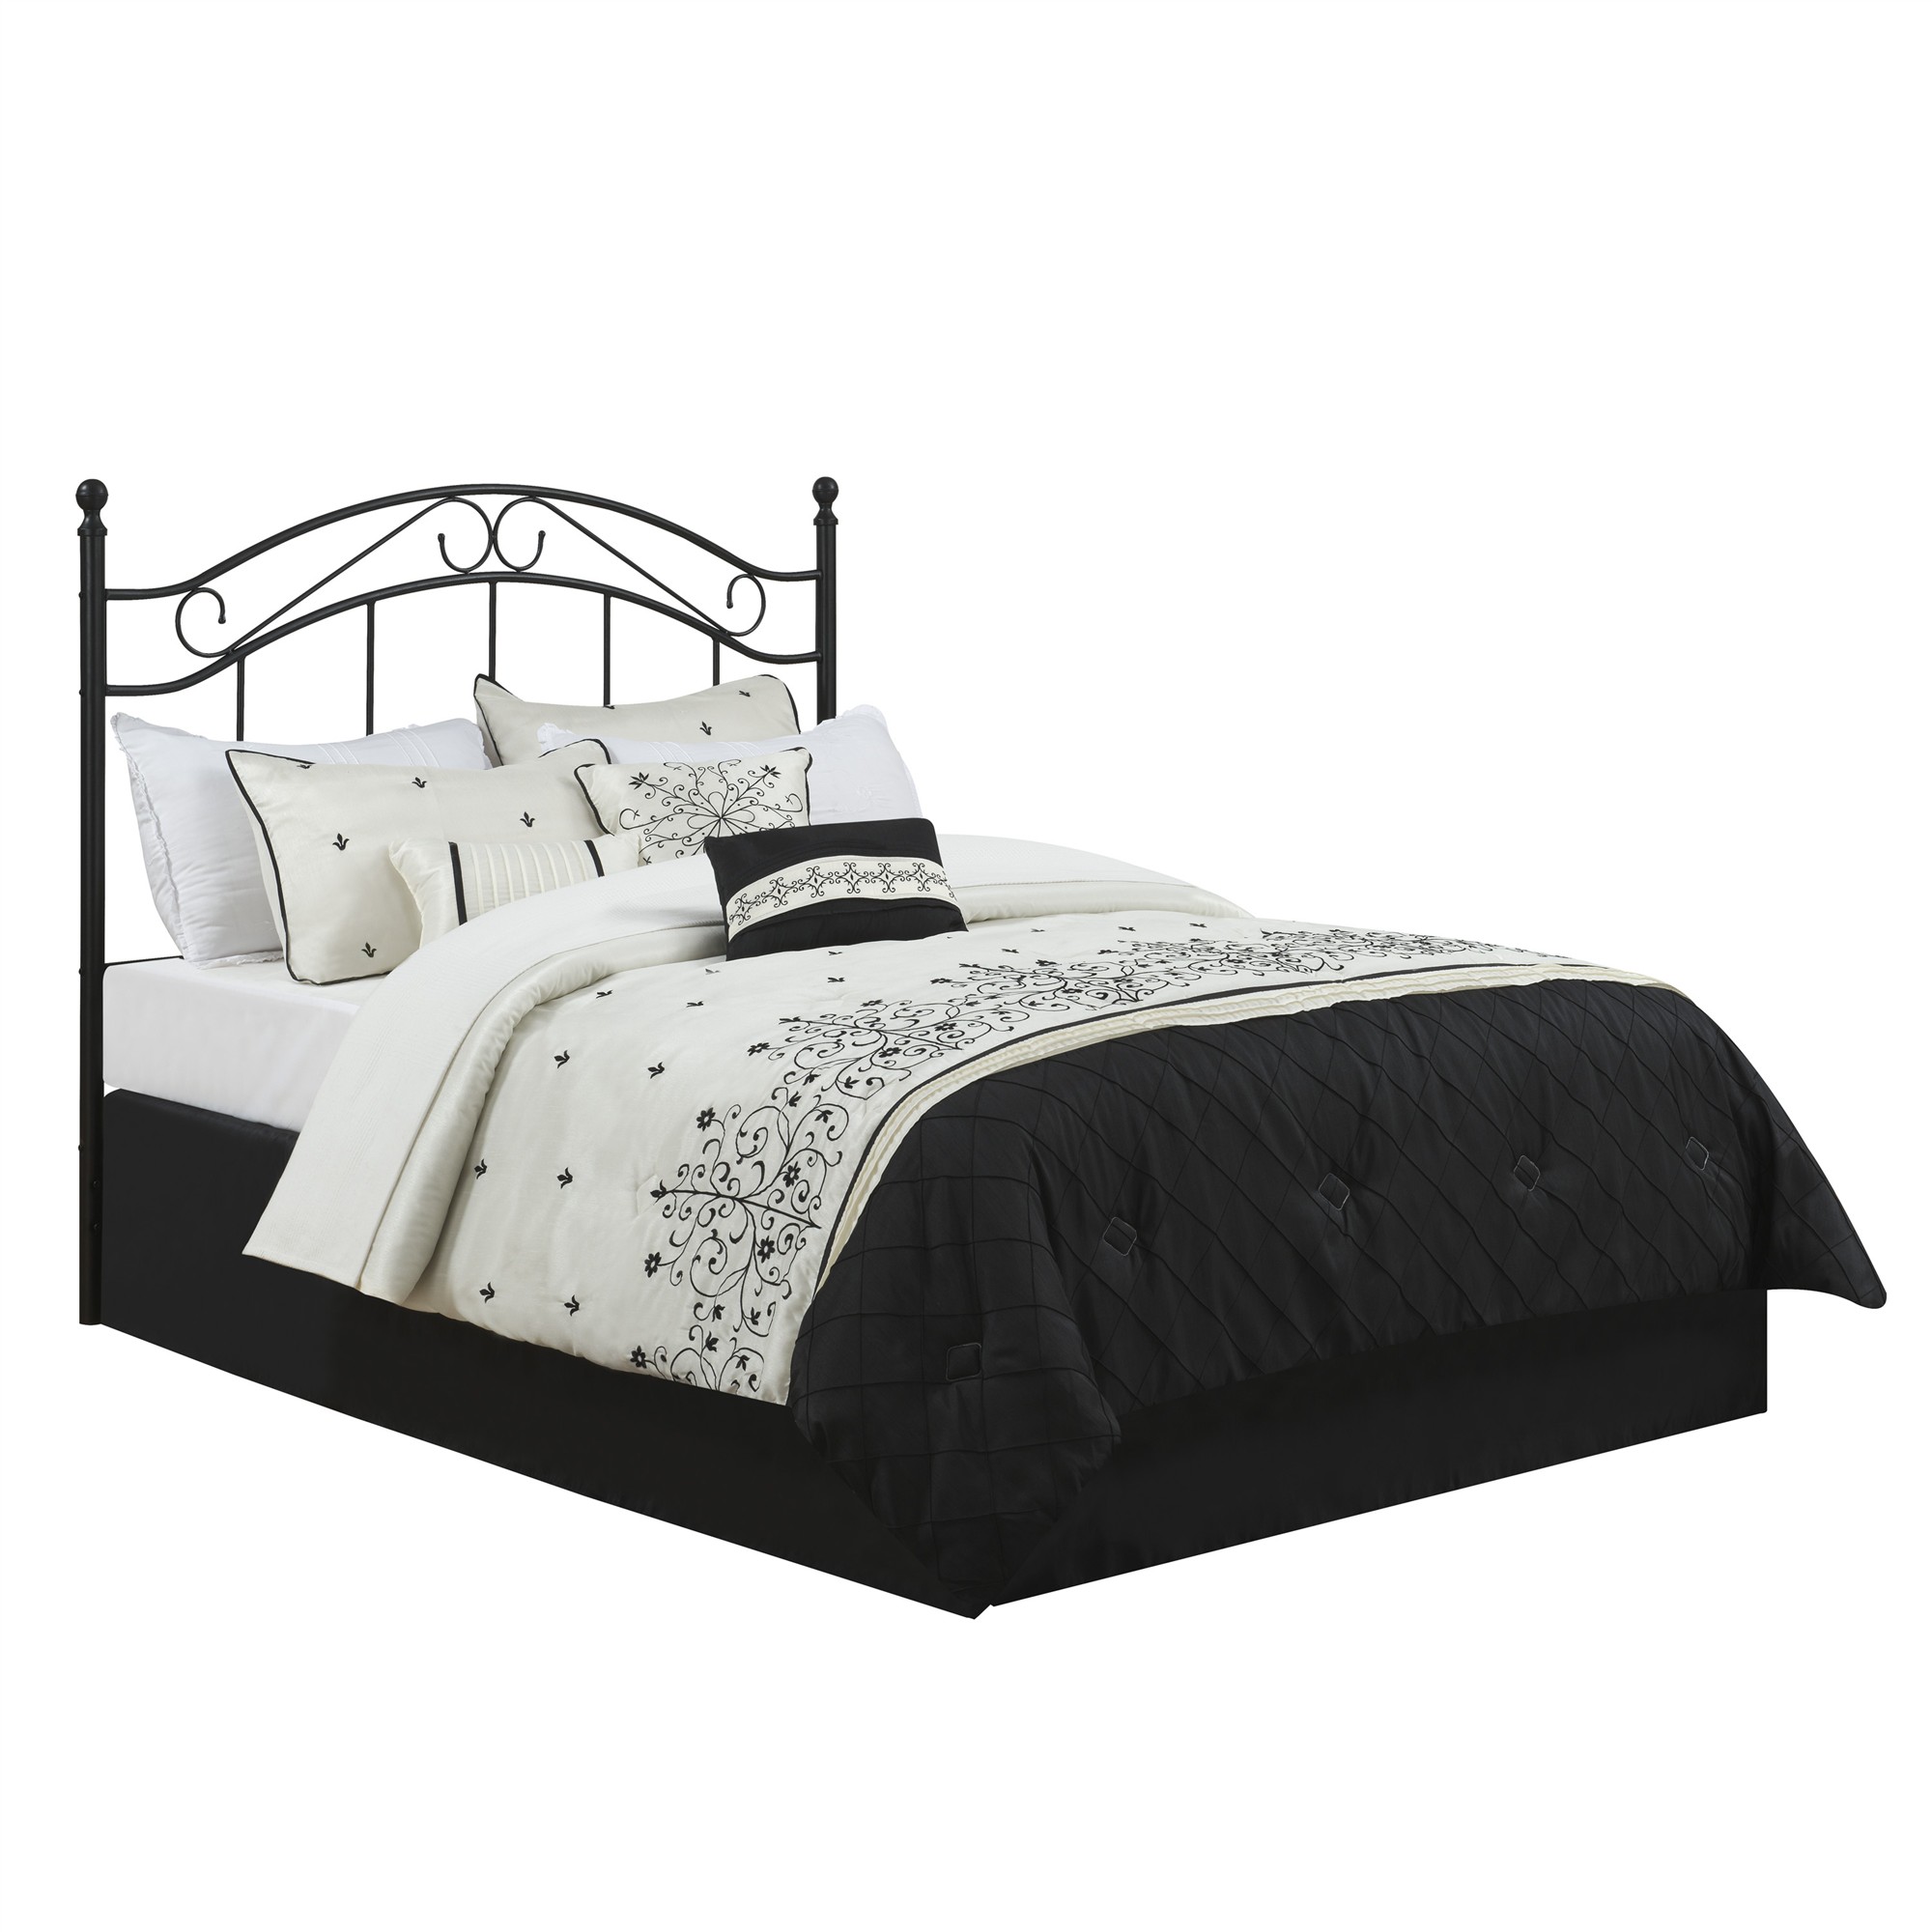 Mainstays Full/Queen Metal Headboard with Delicate Detailing, Black - image 2 of 8